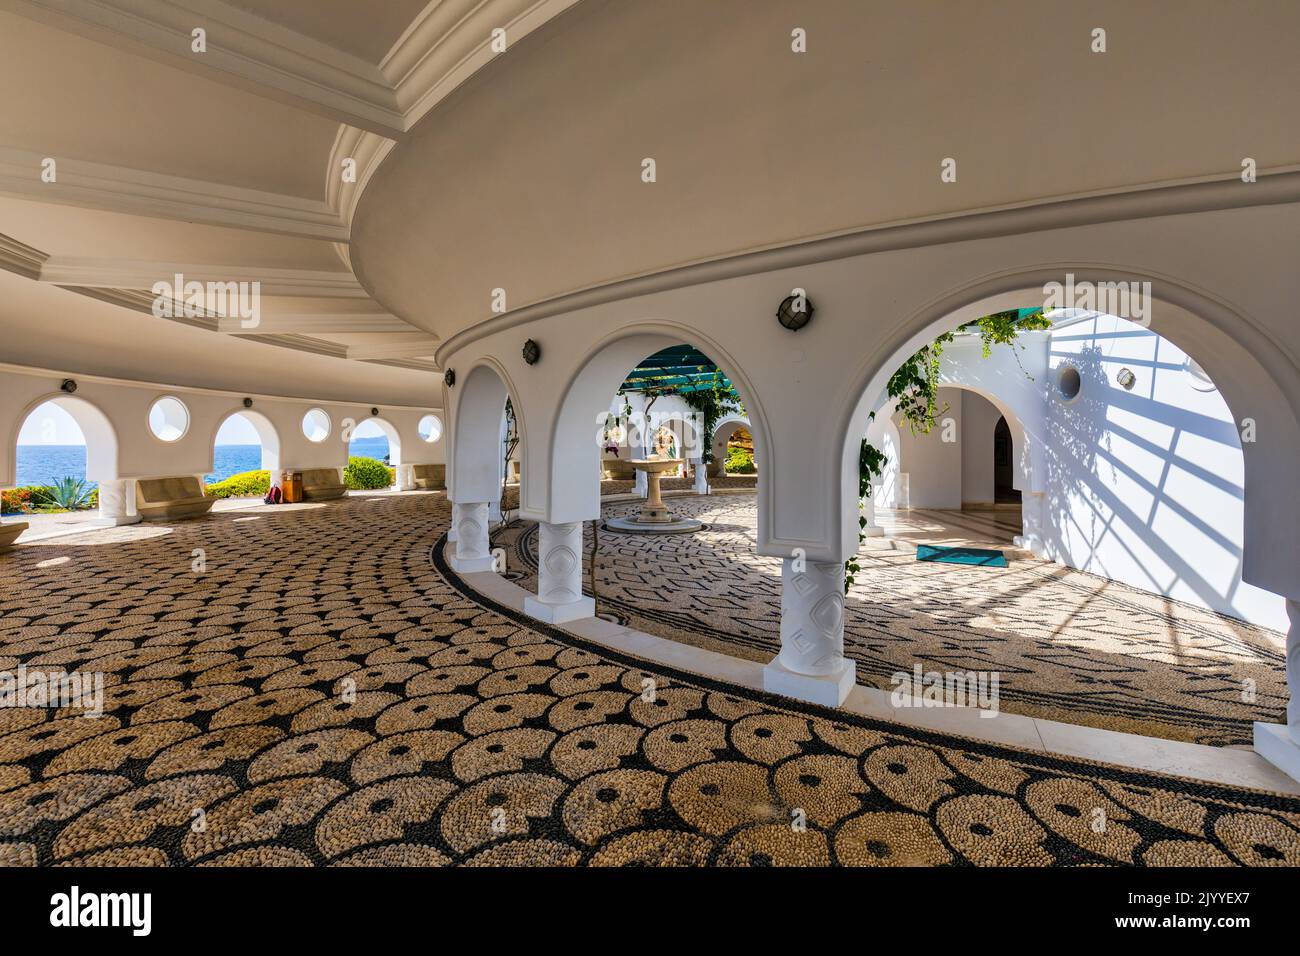 The beautiful buildings at Kalithea Springs constructed in the 1930s, Rhodes Island, Greece, Europe. Kallithea Therms, Kallithea Springs located at th Stock Photo